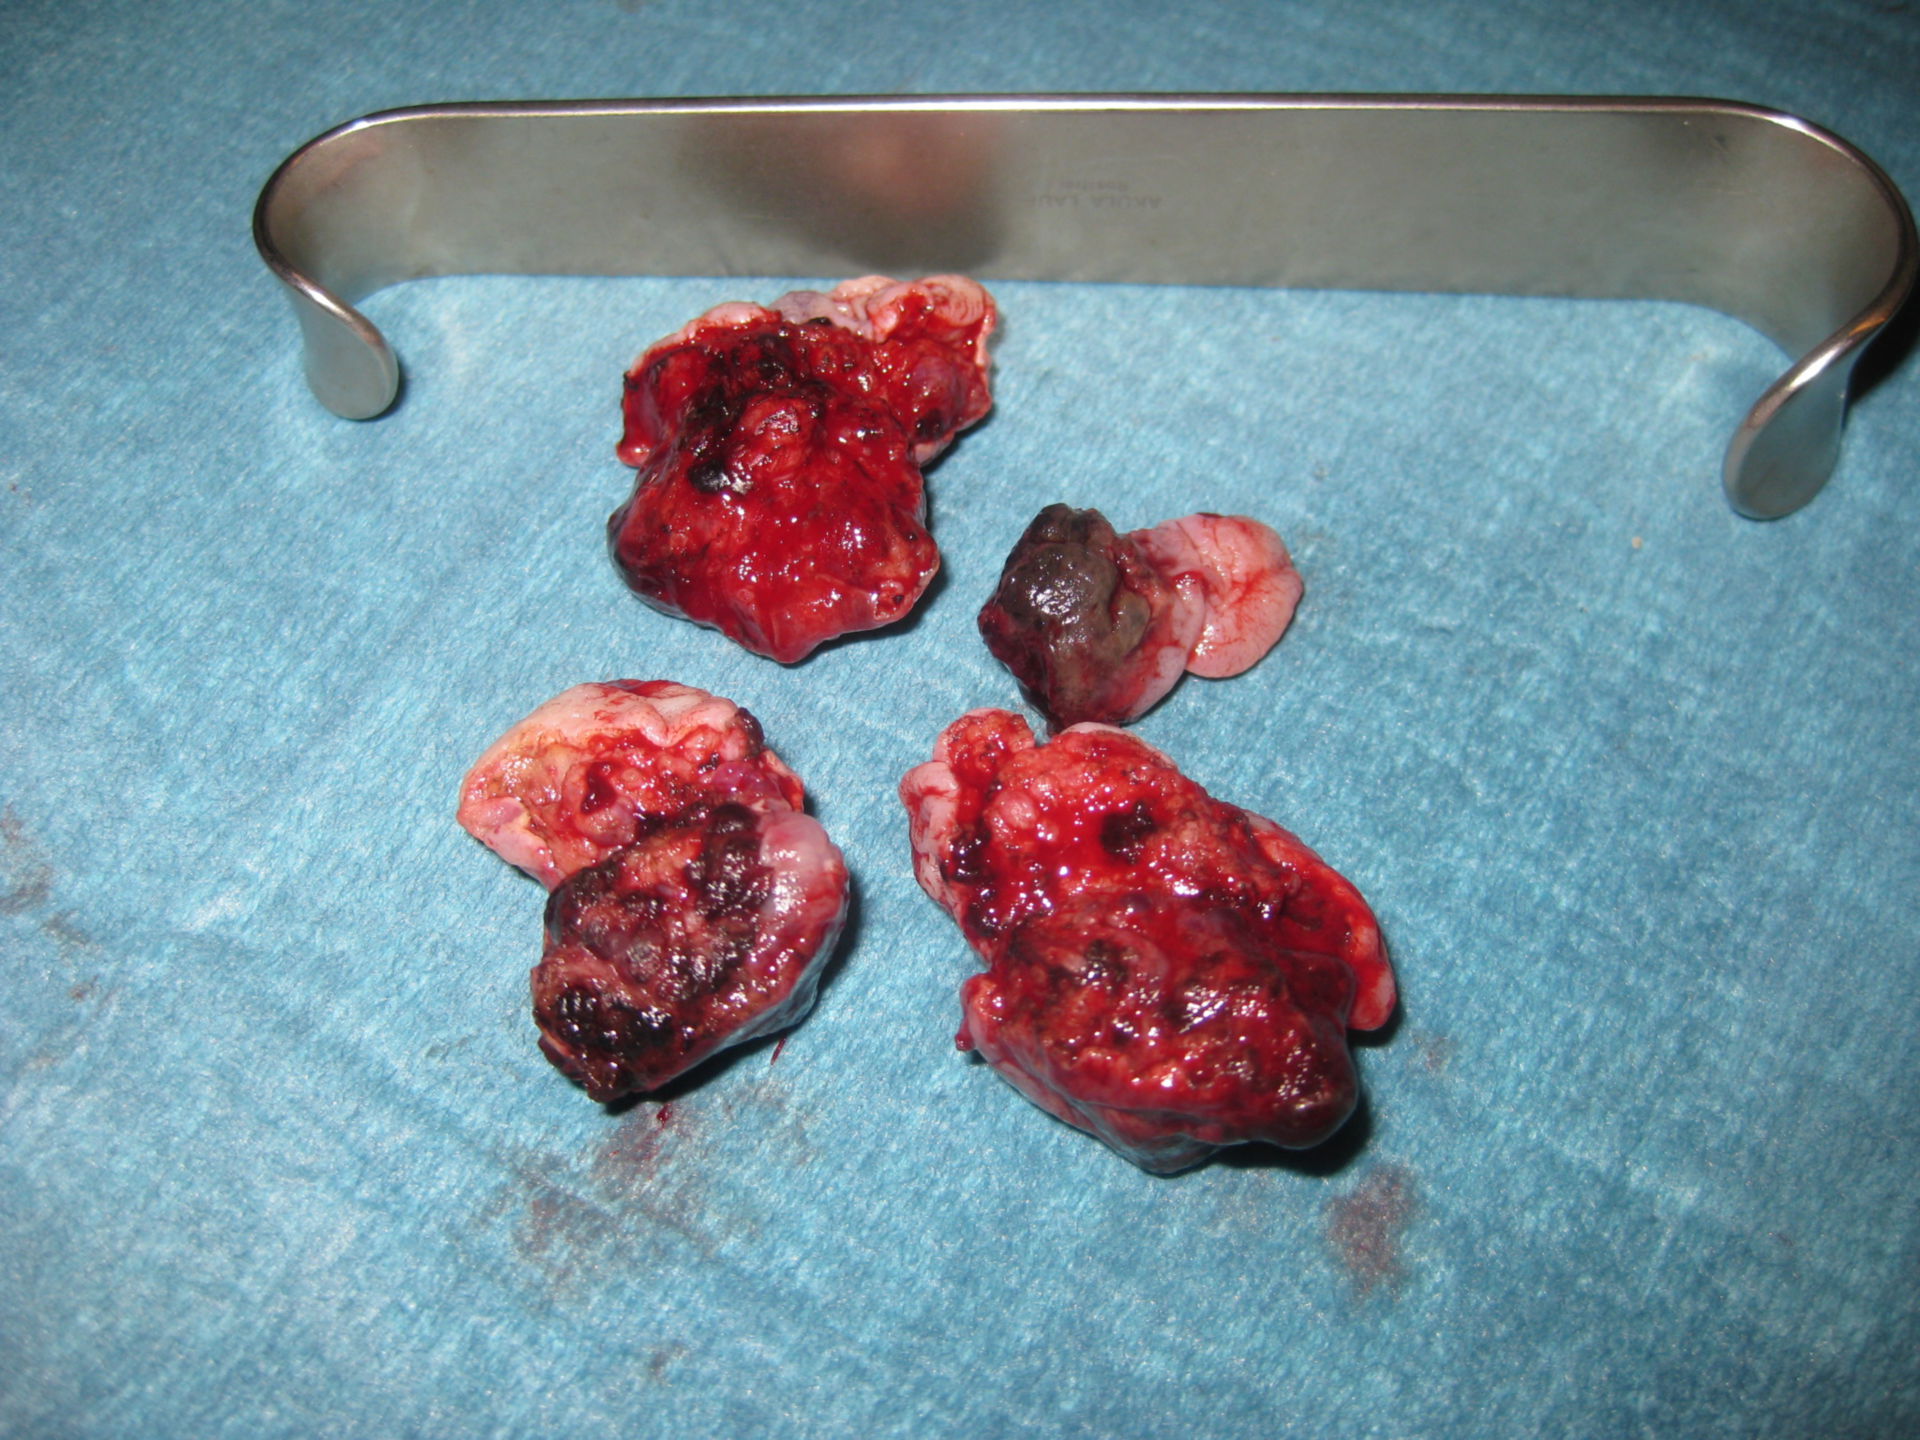 Resected hemorrhoids